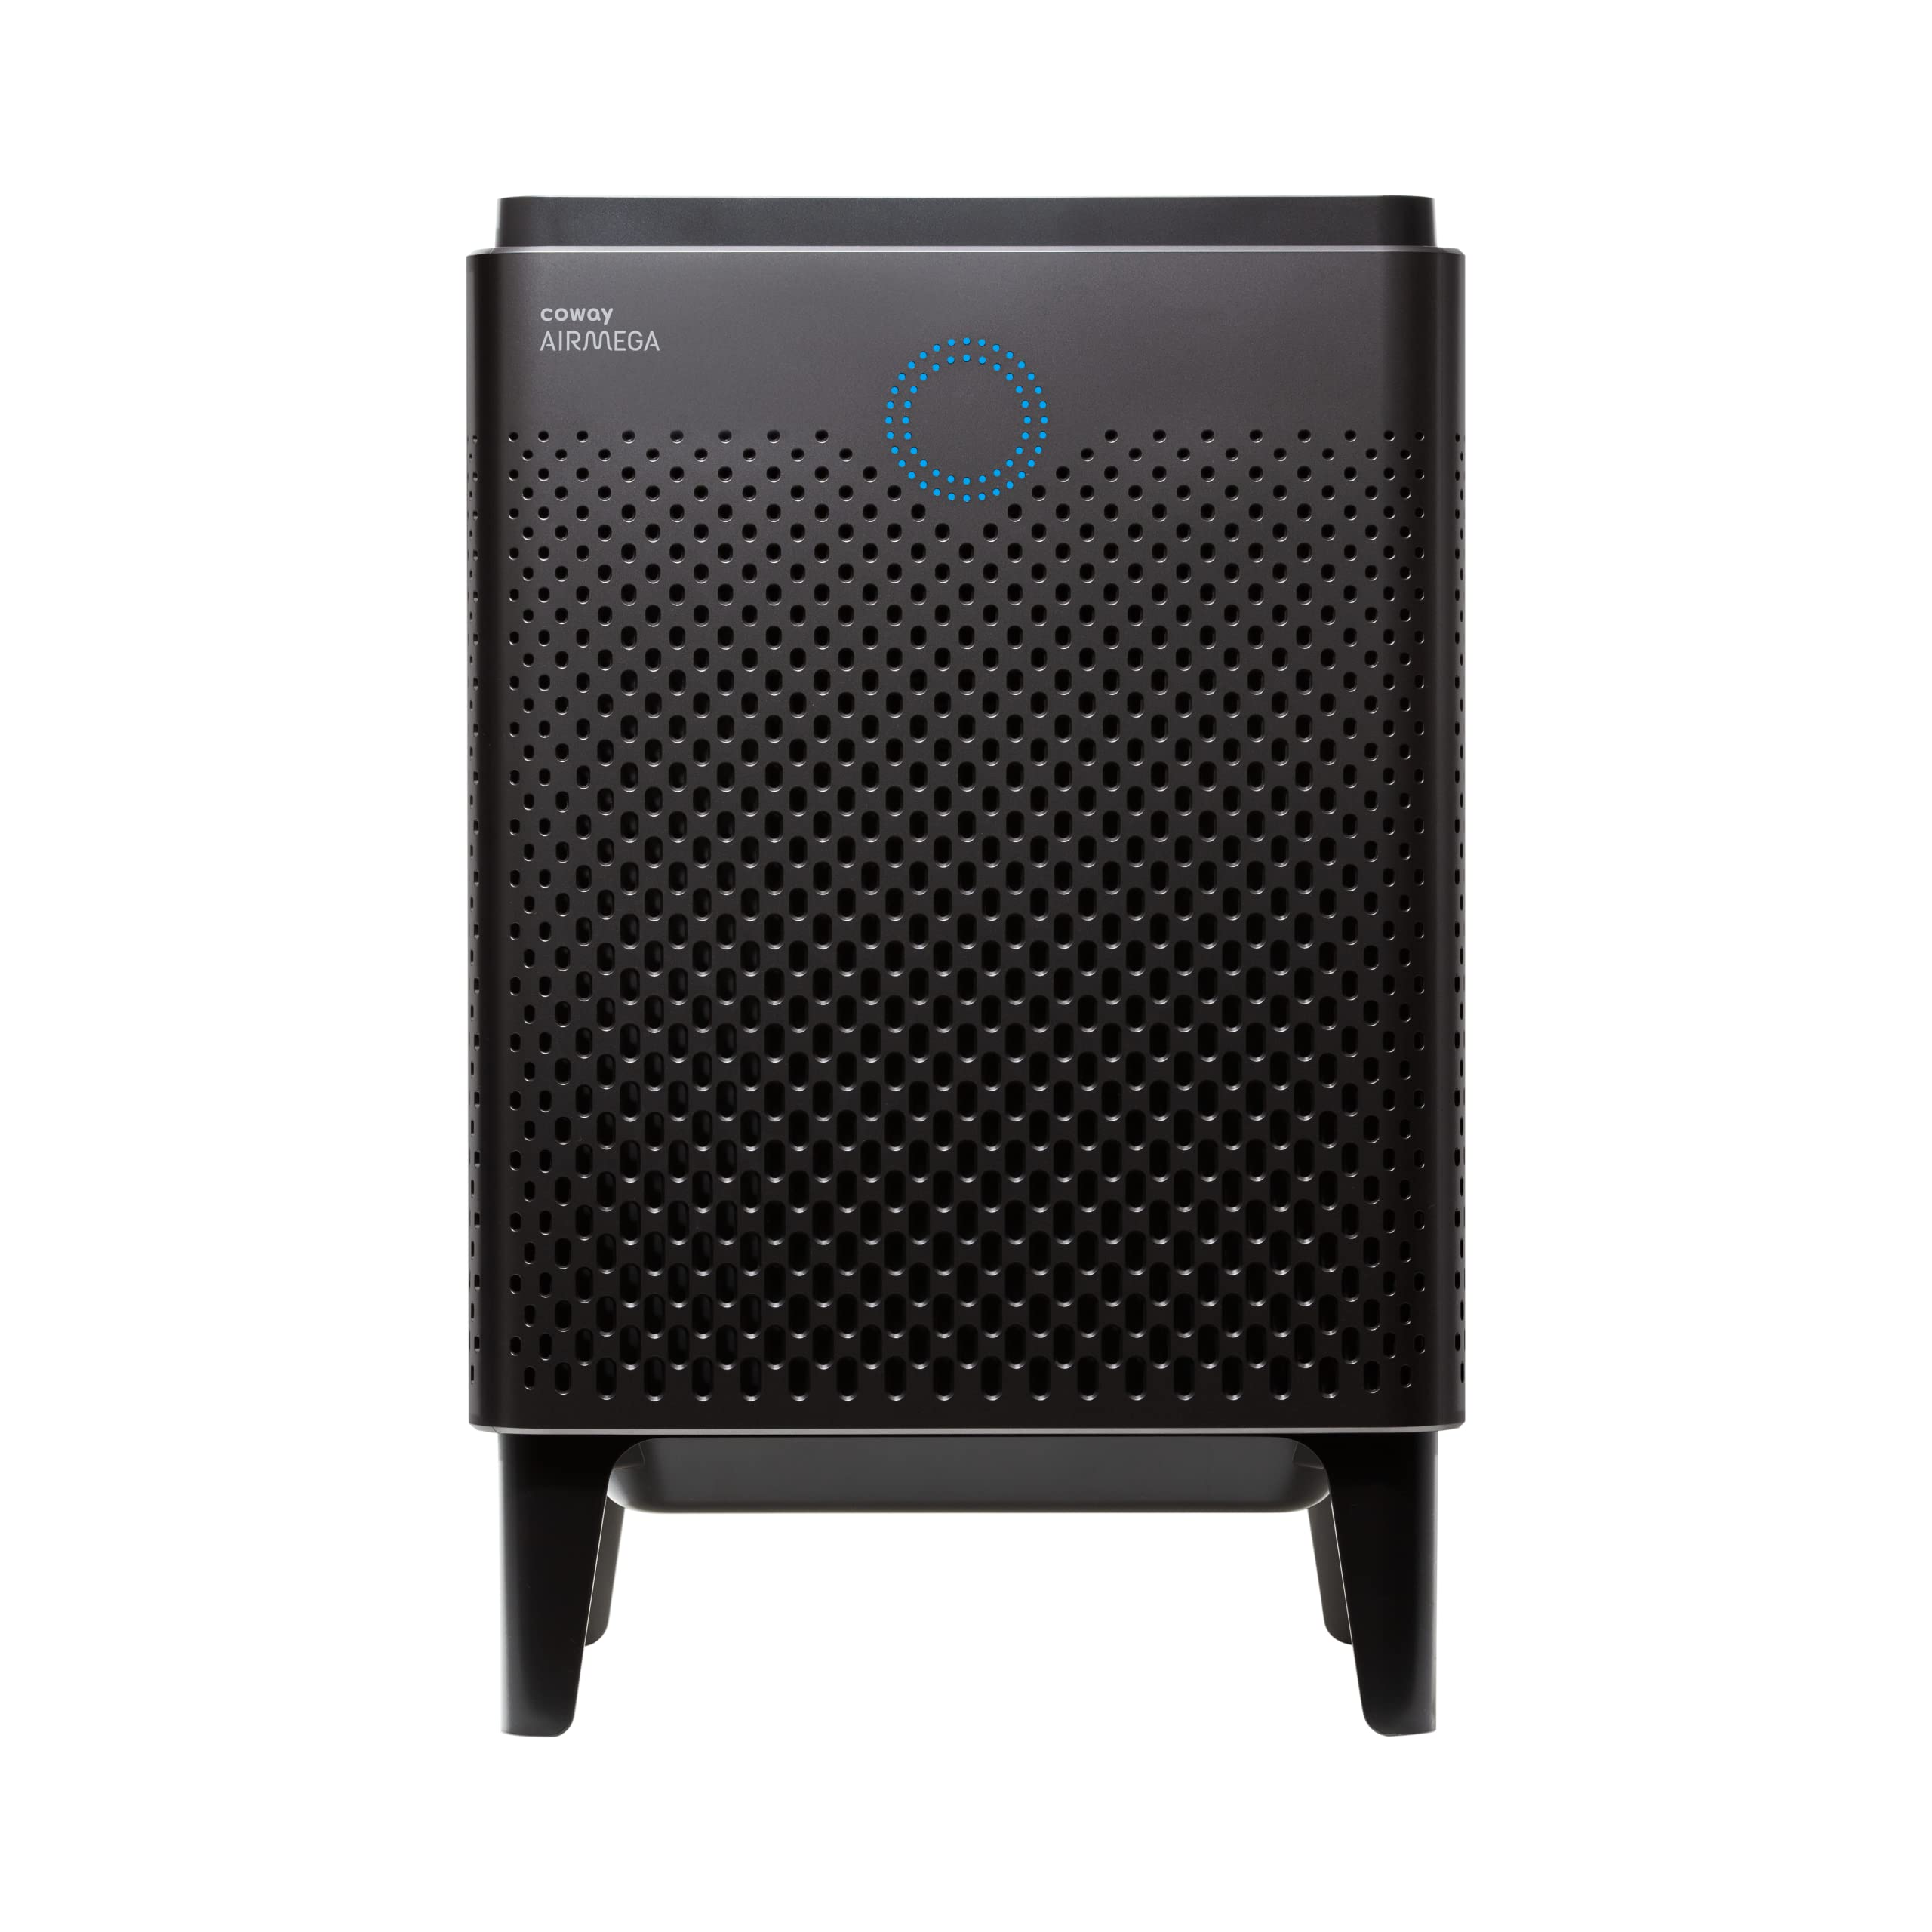 Coway Airmega 400(G) Smart Air Purifier True HEPA Air Purifier with Smart Technology, Covers 1,560 sq. ft., Graphite $395.49 at Amazon